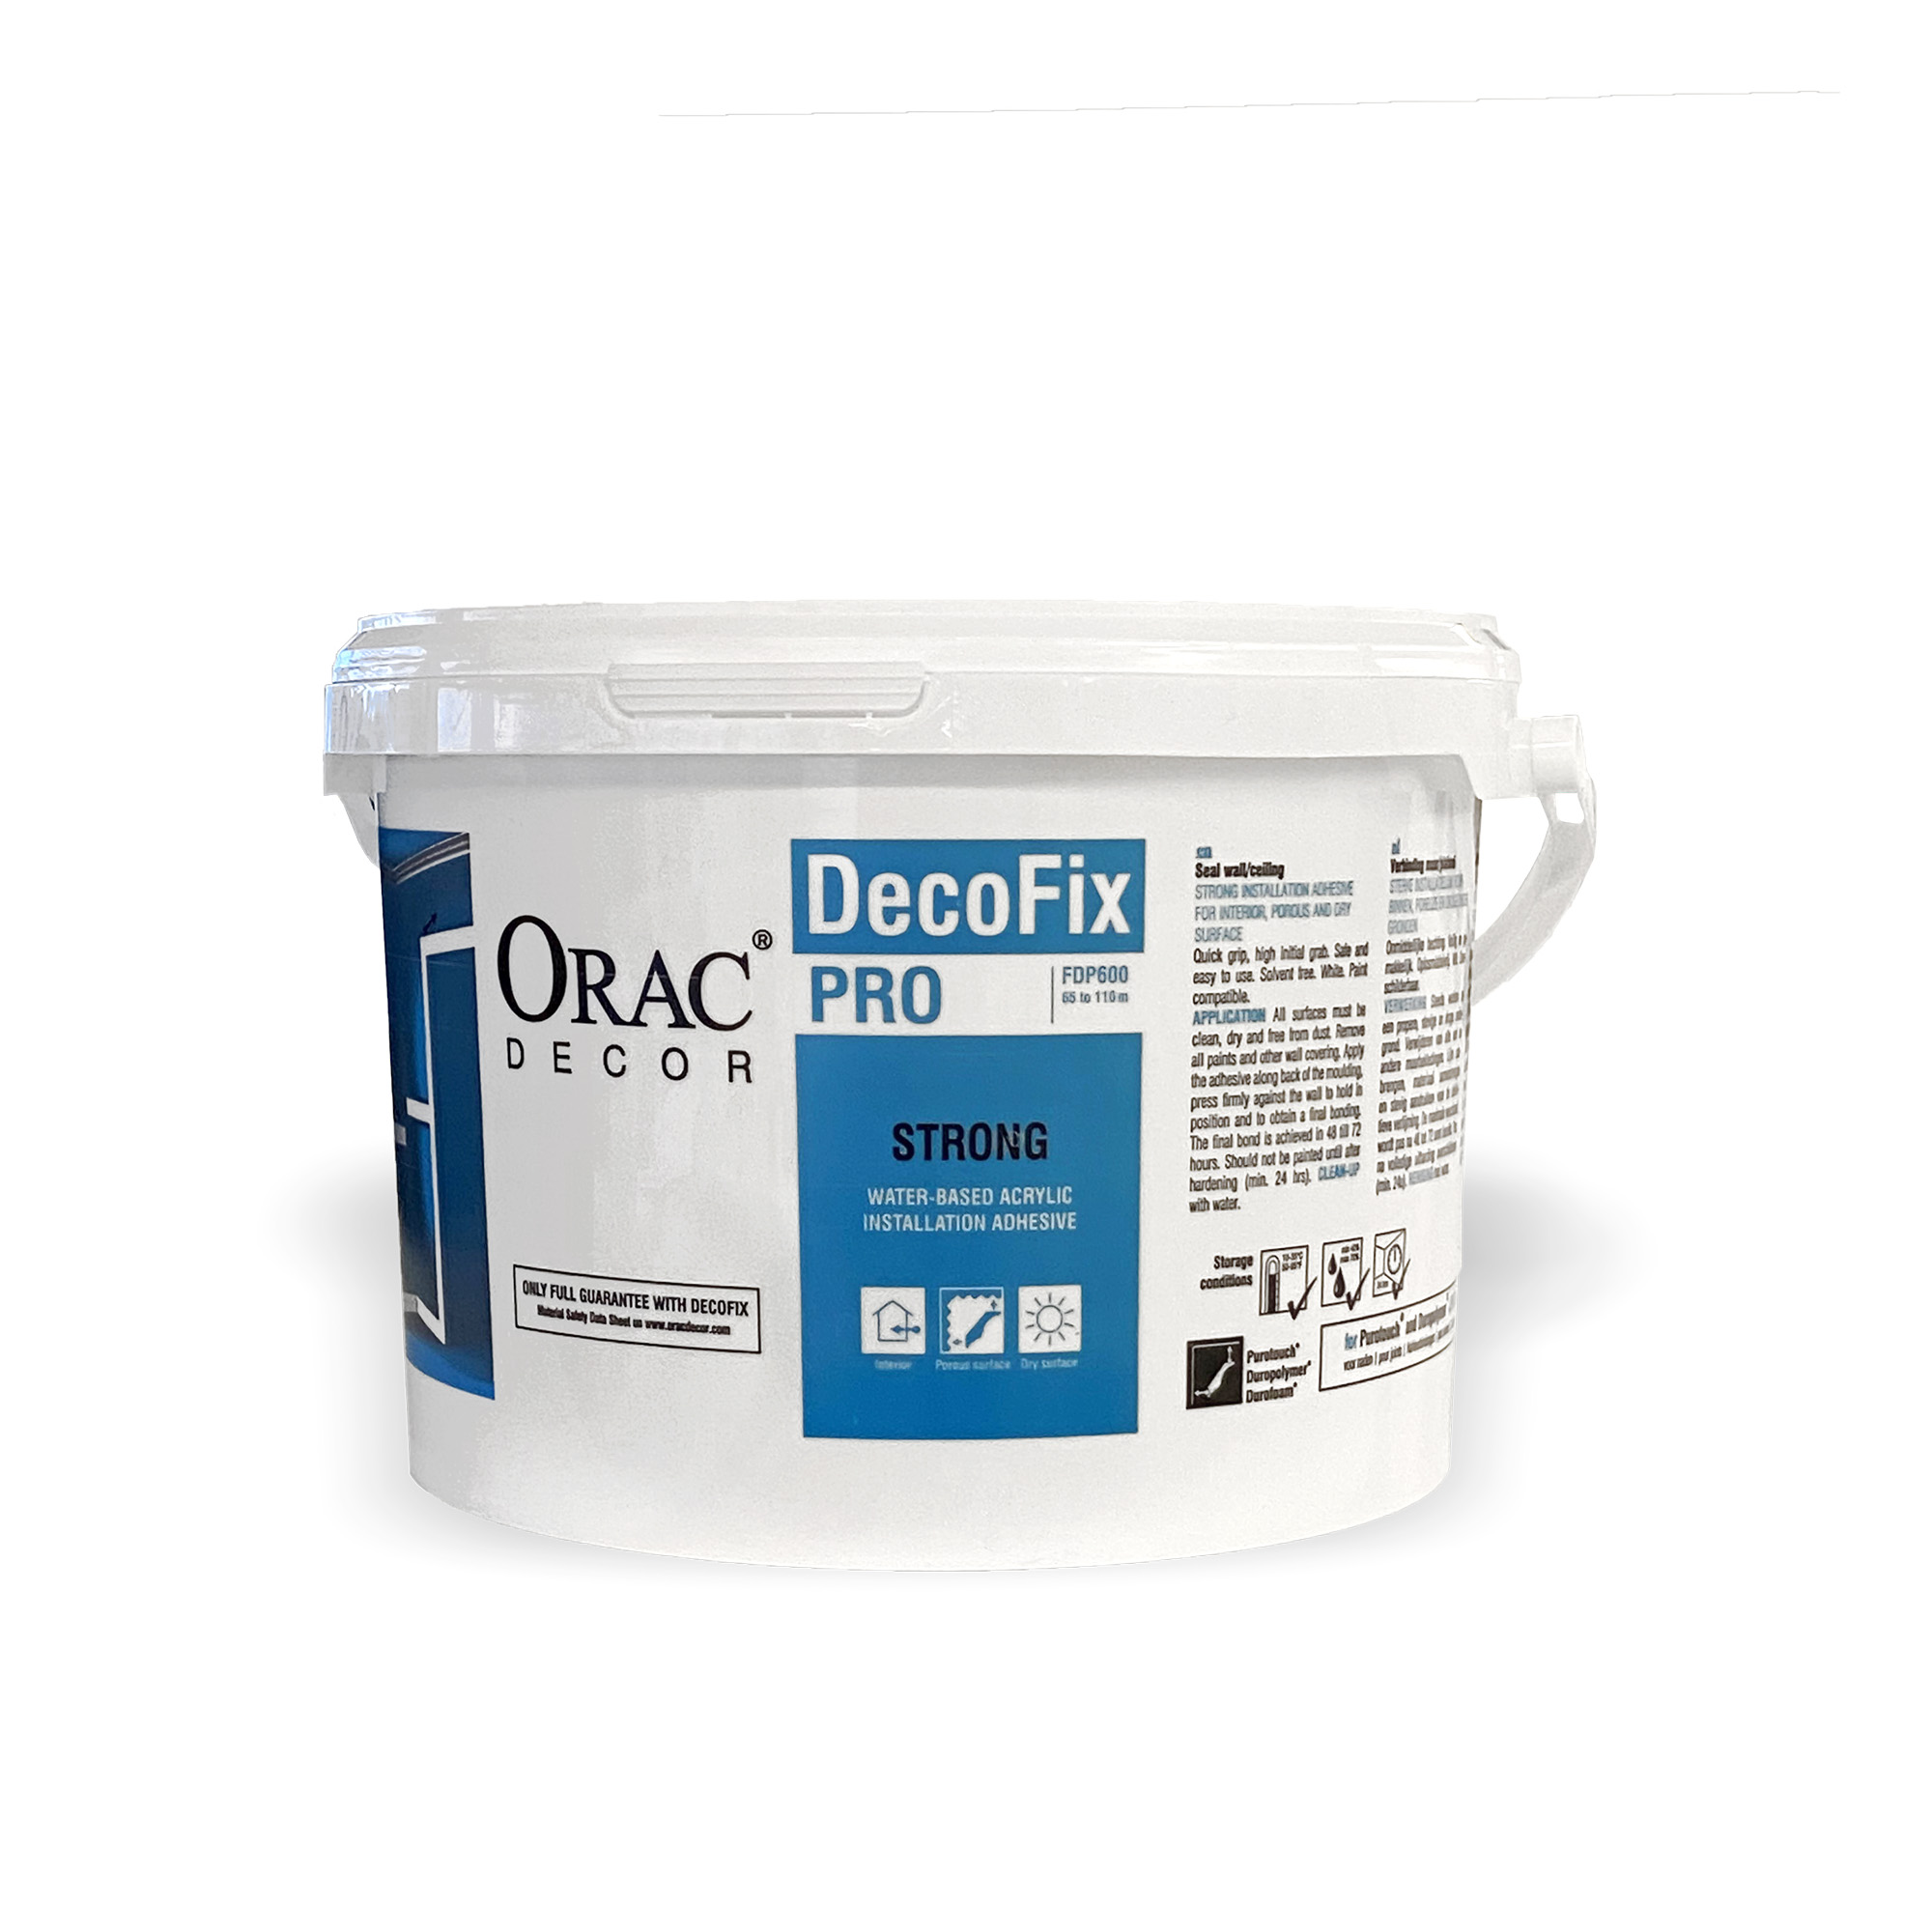 Strong mounting adhesive DecoFix Pro - FDP600
